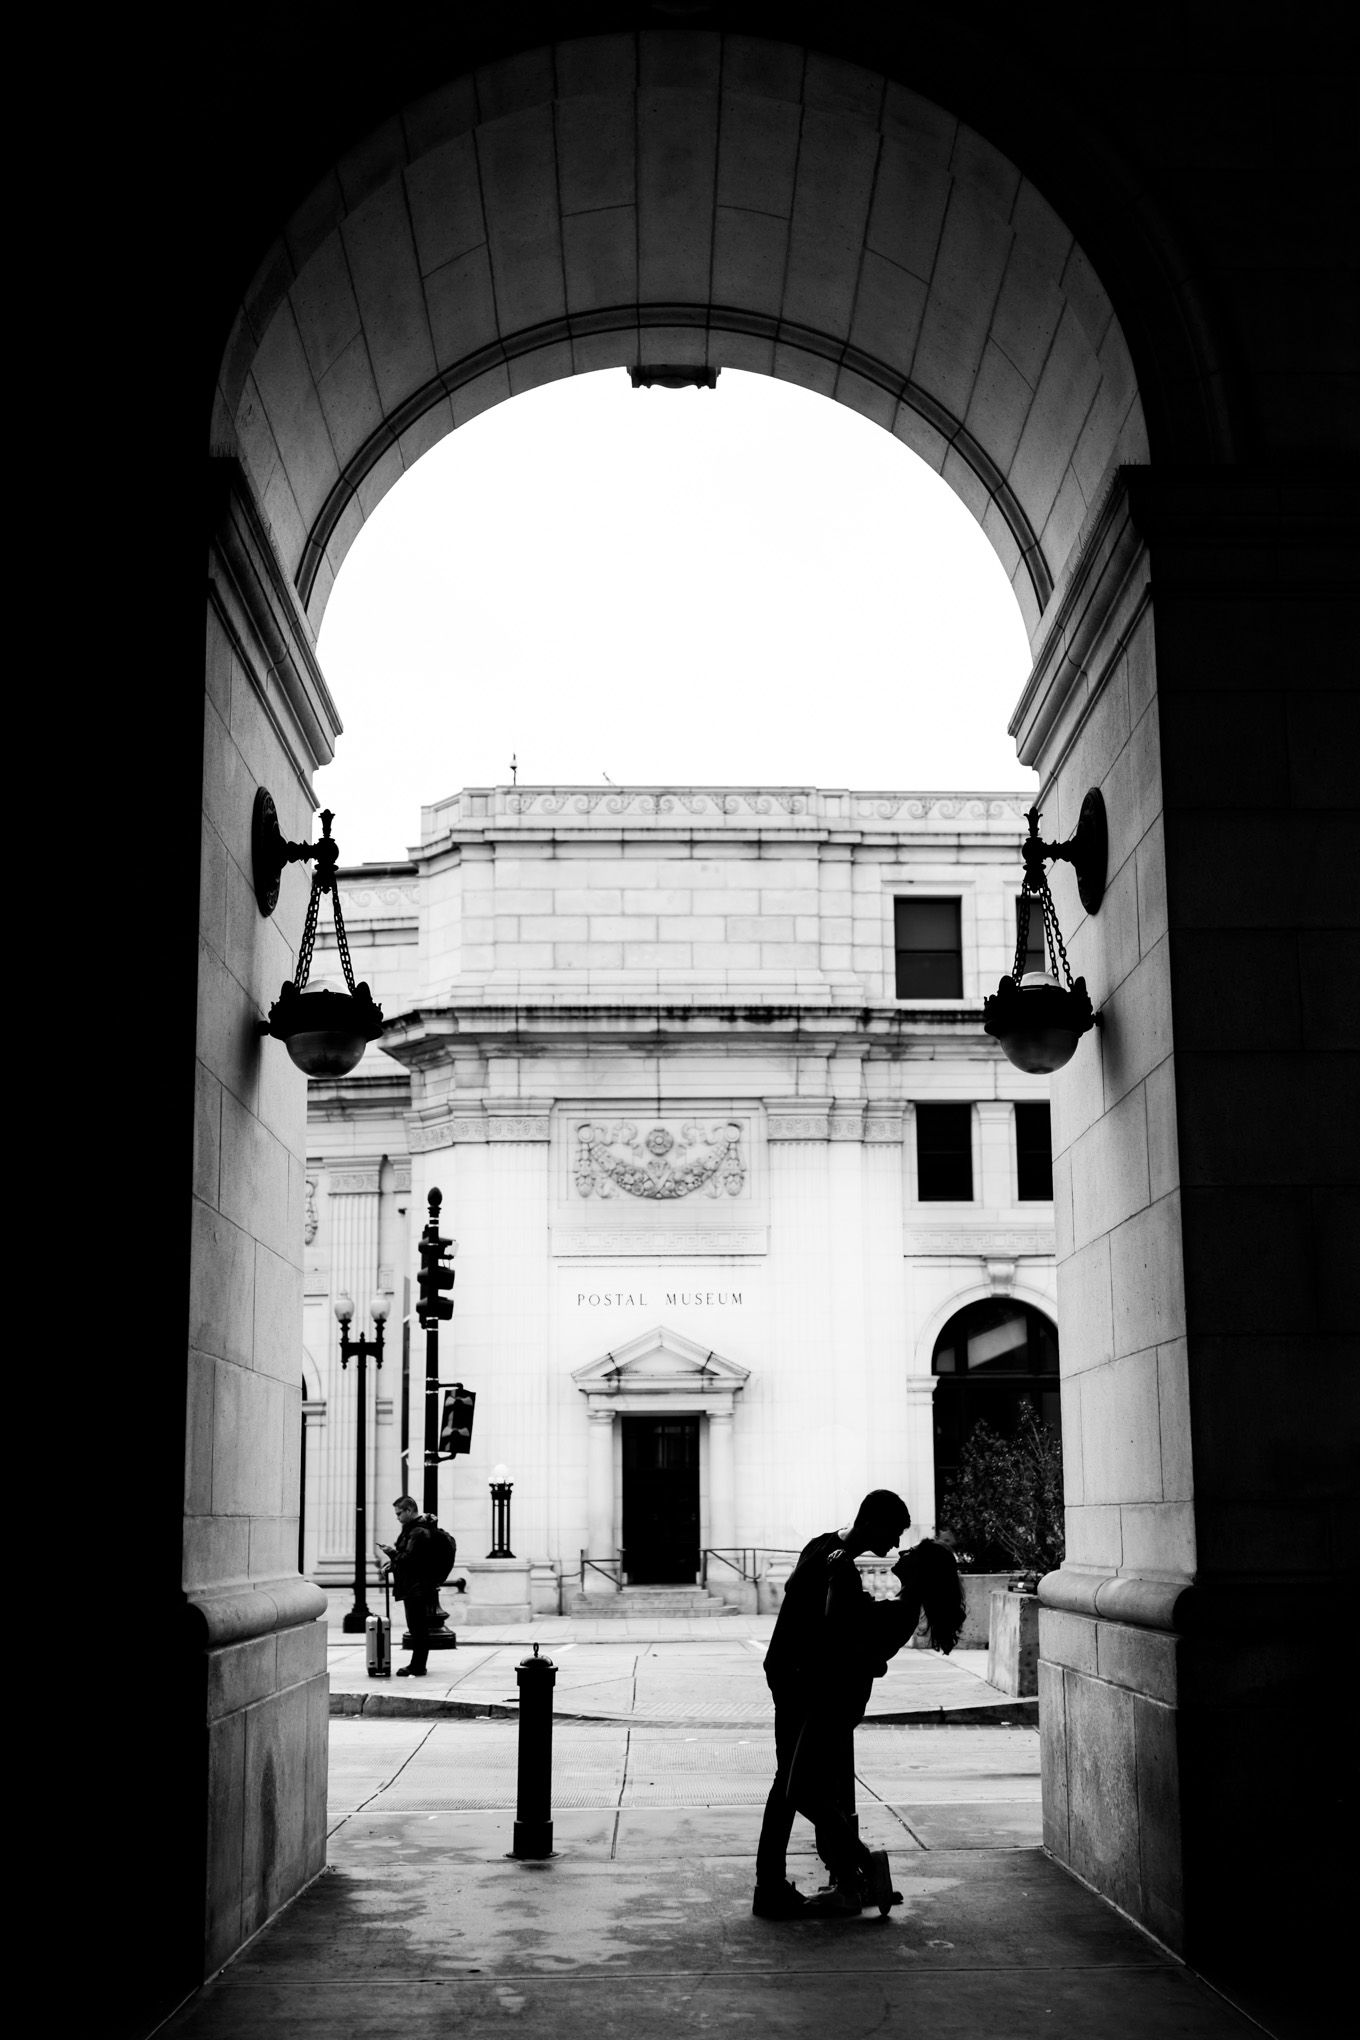 black and white engagement photos, black and white photography, black and white photos, engagement photos, black and white D.C., D.C. engagement photos, classic engagement photos, traditional engagement photos, engagement photos poses, classic architecture, D.C. architecture, Union Station D.C., Union Station, engaged couple, relationship goals, joyful couple, black and white sessions, romantic portraits, couple kissing, silhouette